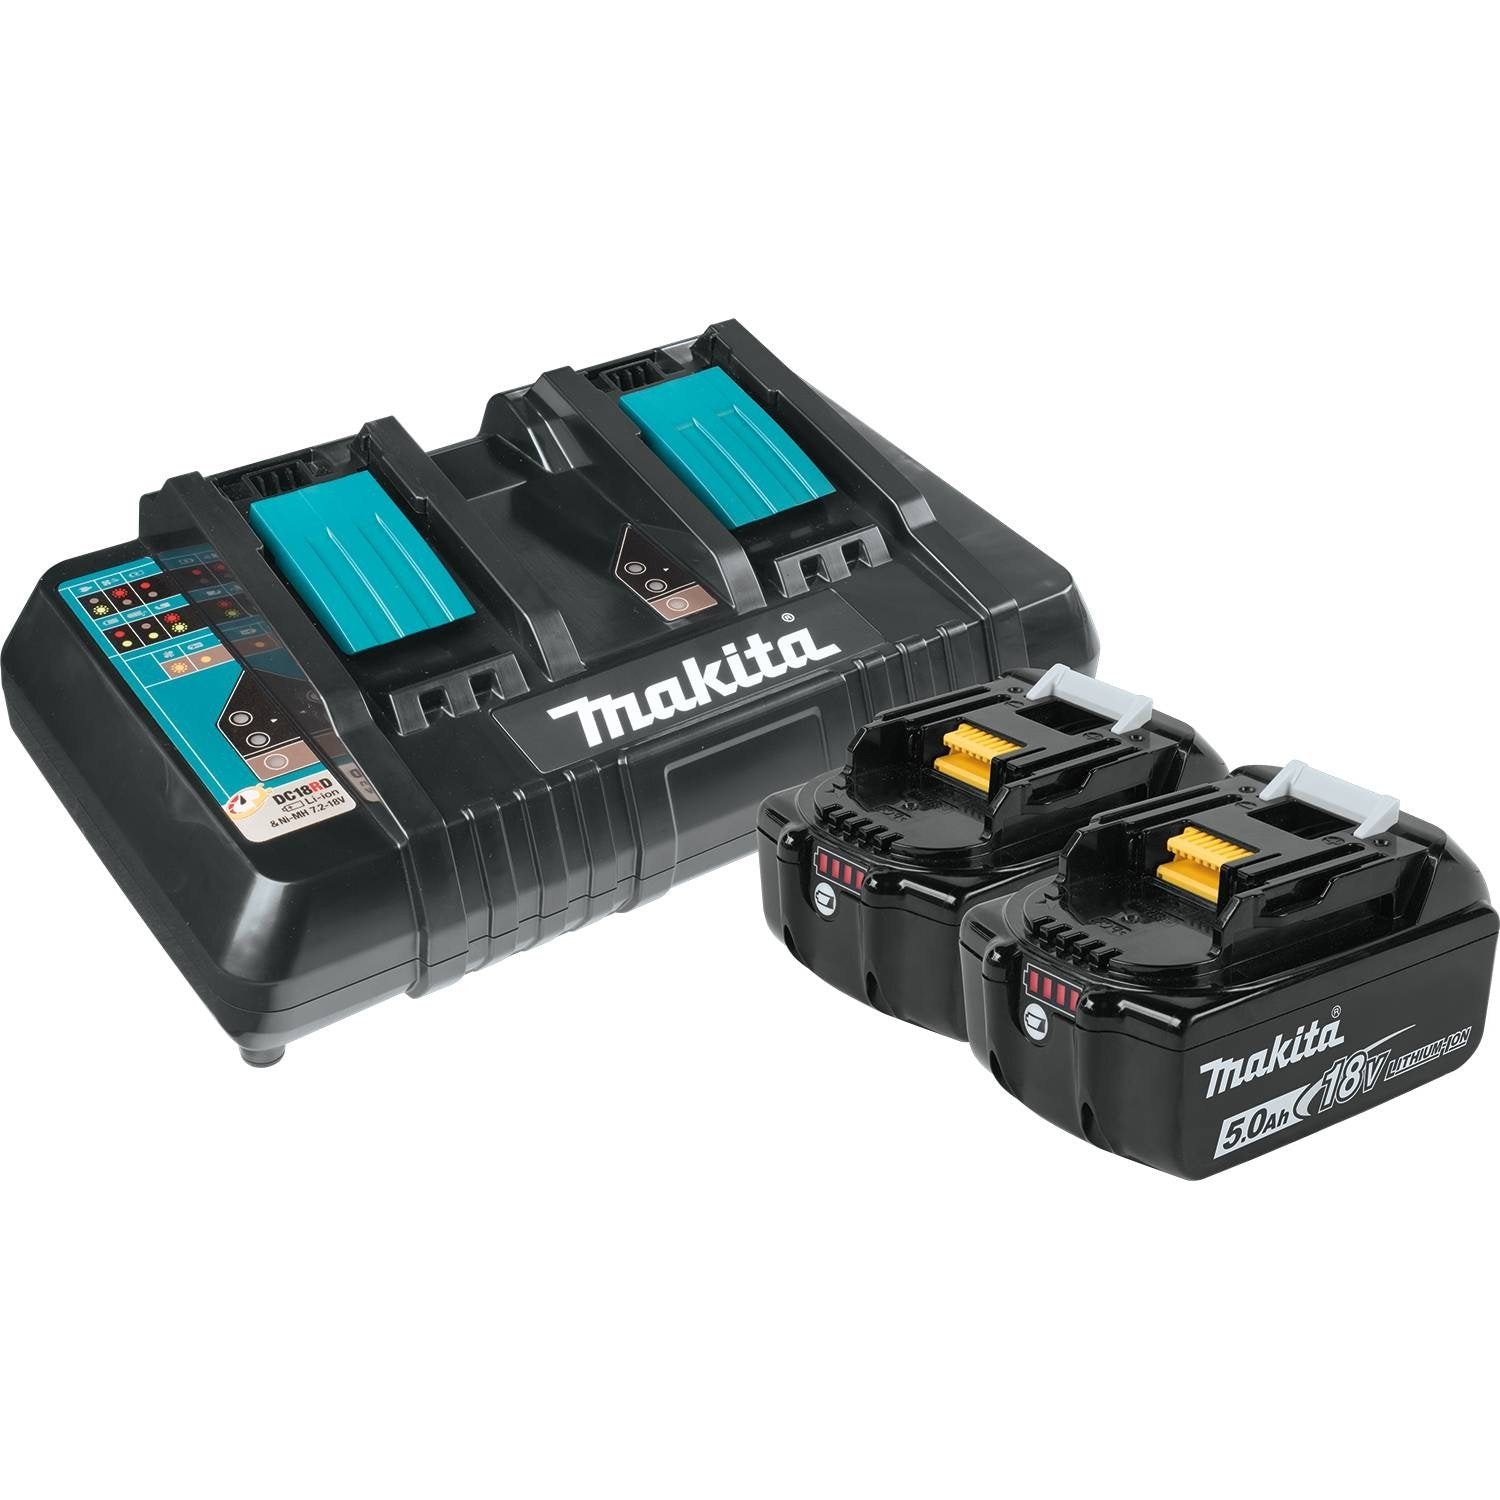 Makita Y-00359 - 18V Dual Port Charger with 2 5.0Ah Batterie - wise-line-tools